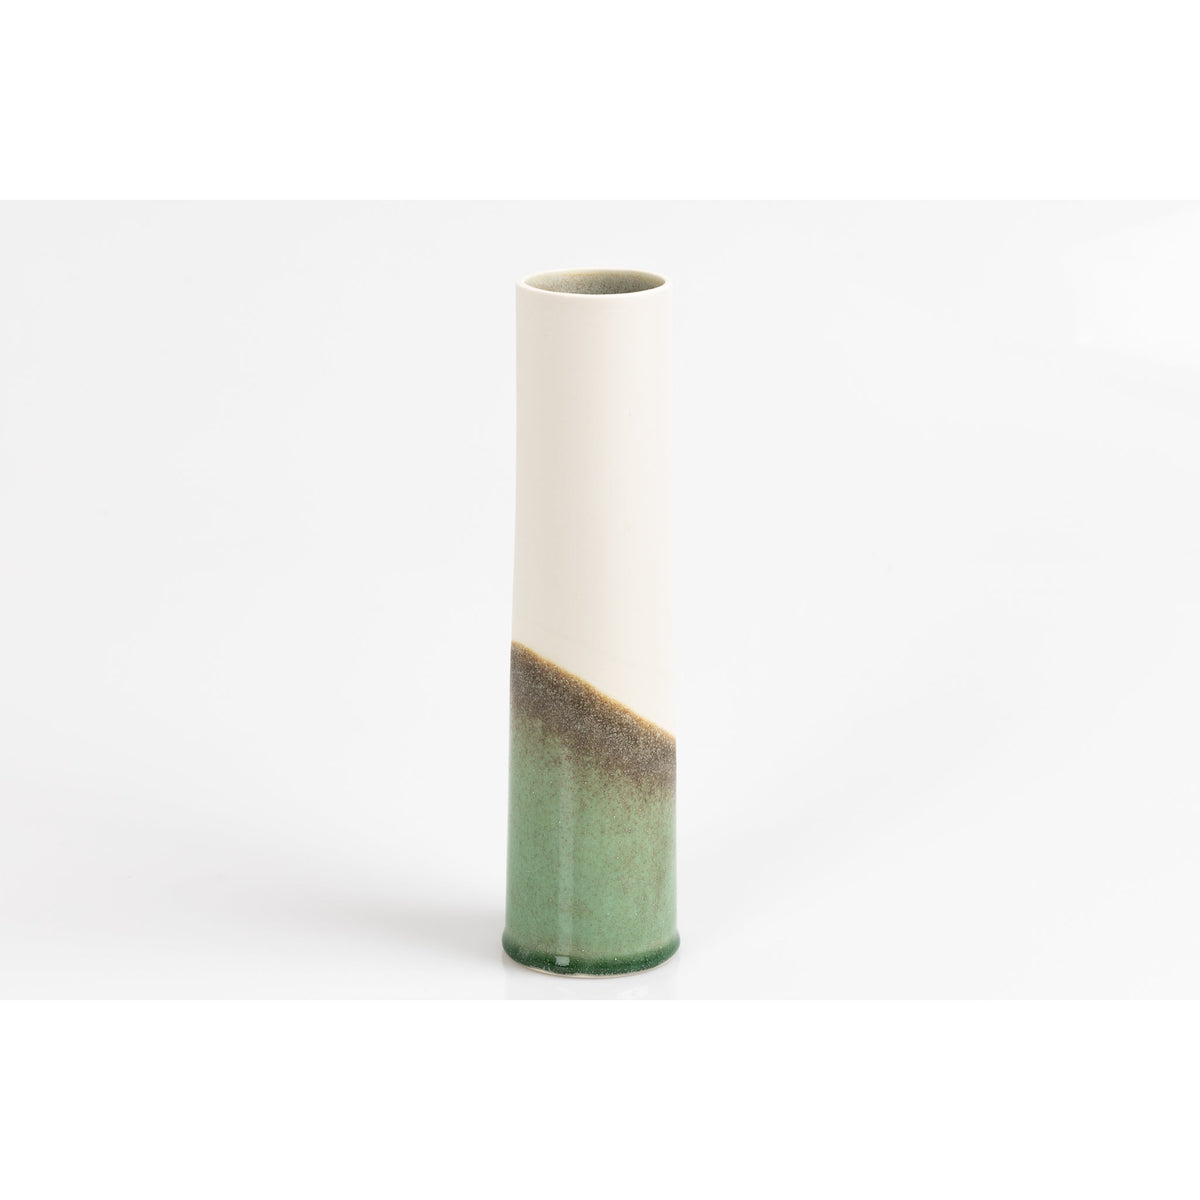 KSN1 South Downs I, Tapered Vessel by Kate Schuricht, available at Padstow Gallery, Cornwall